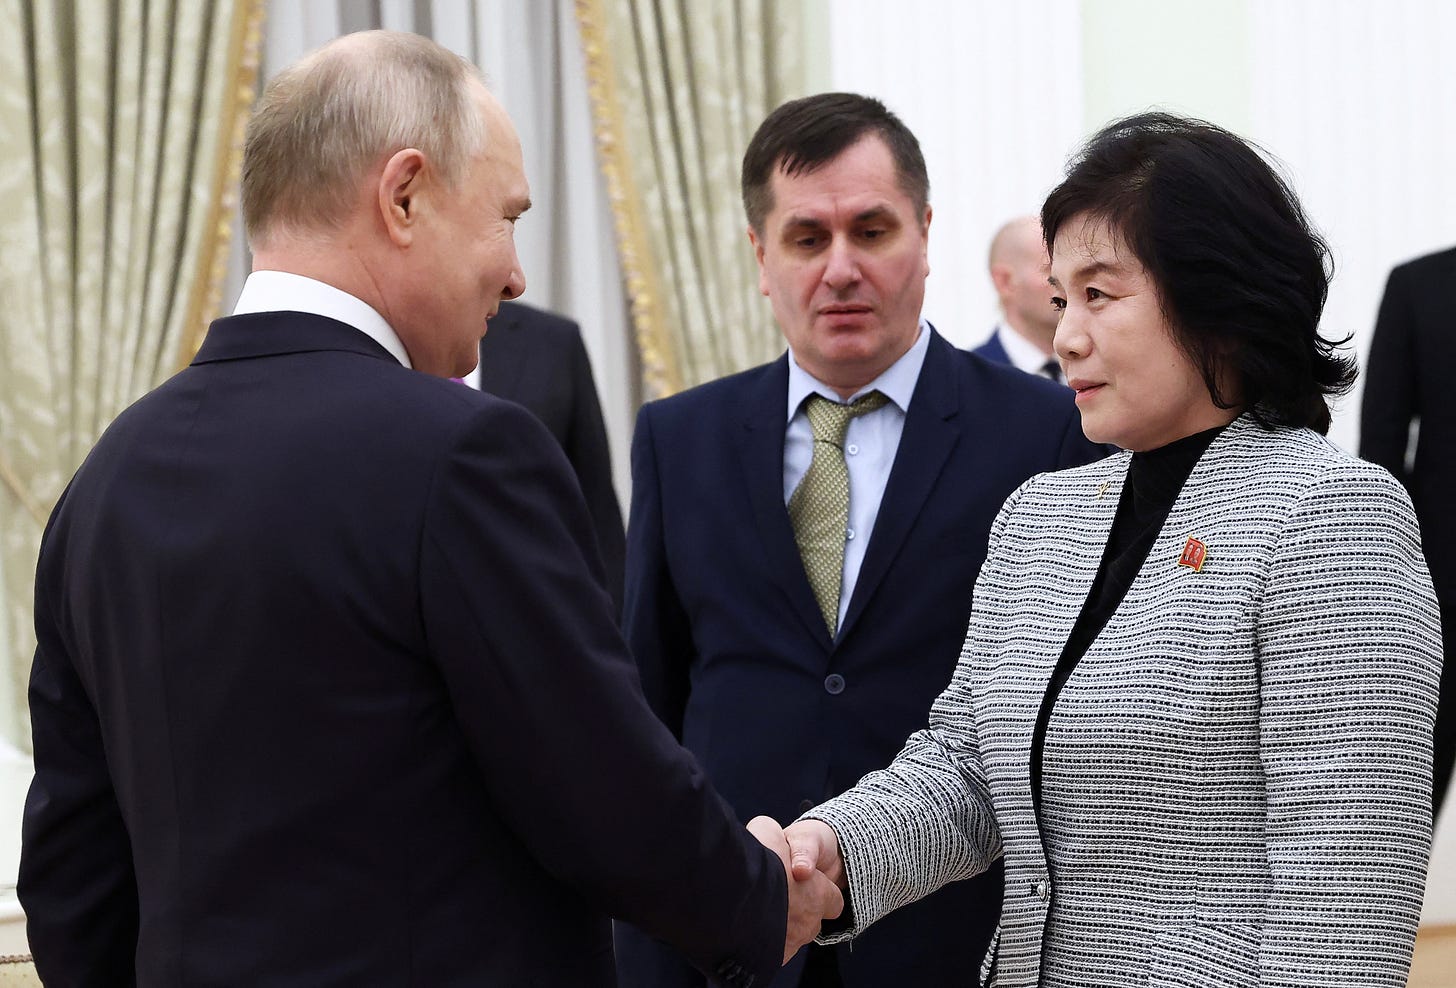 Russian President Vladimir Putin meets North Korean Foreign Minister Choe Son Hui in Moscow